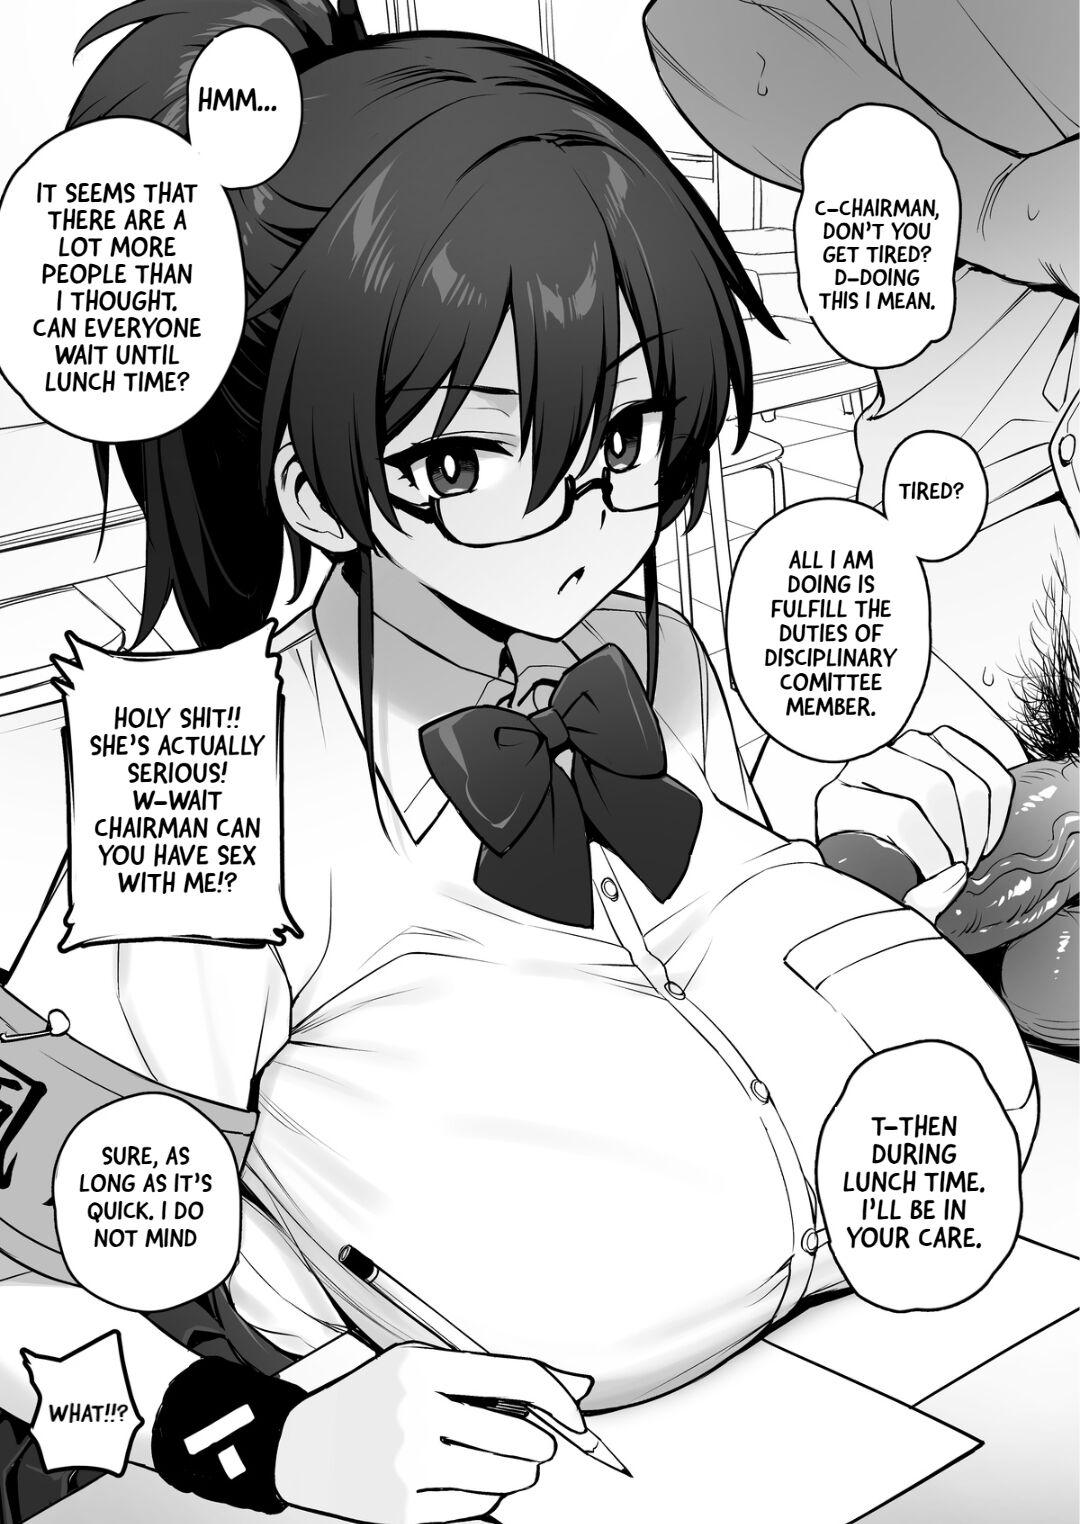 Bath Rumor Has It That The New Chairman of Disciplinary Committee Has Huge Breasts. Animation - Page 8